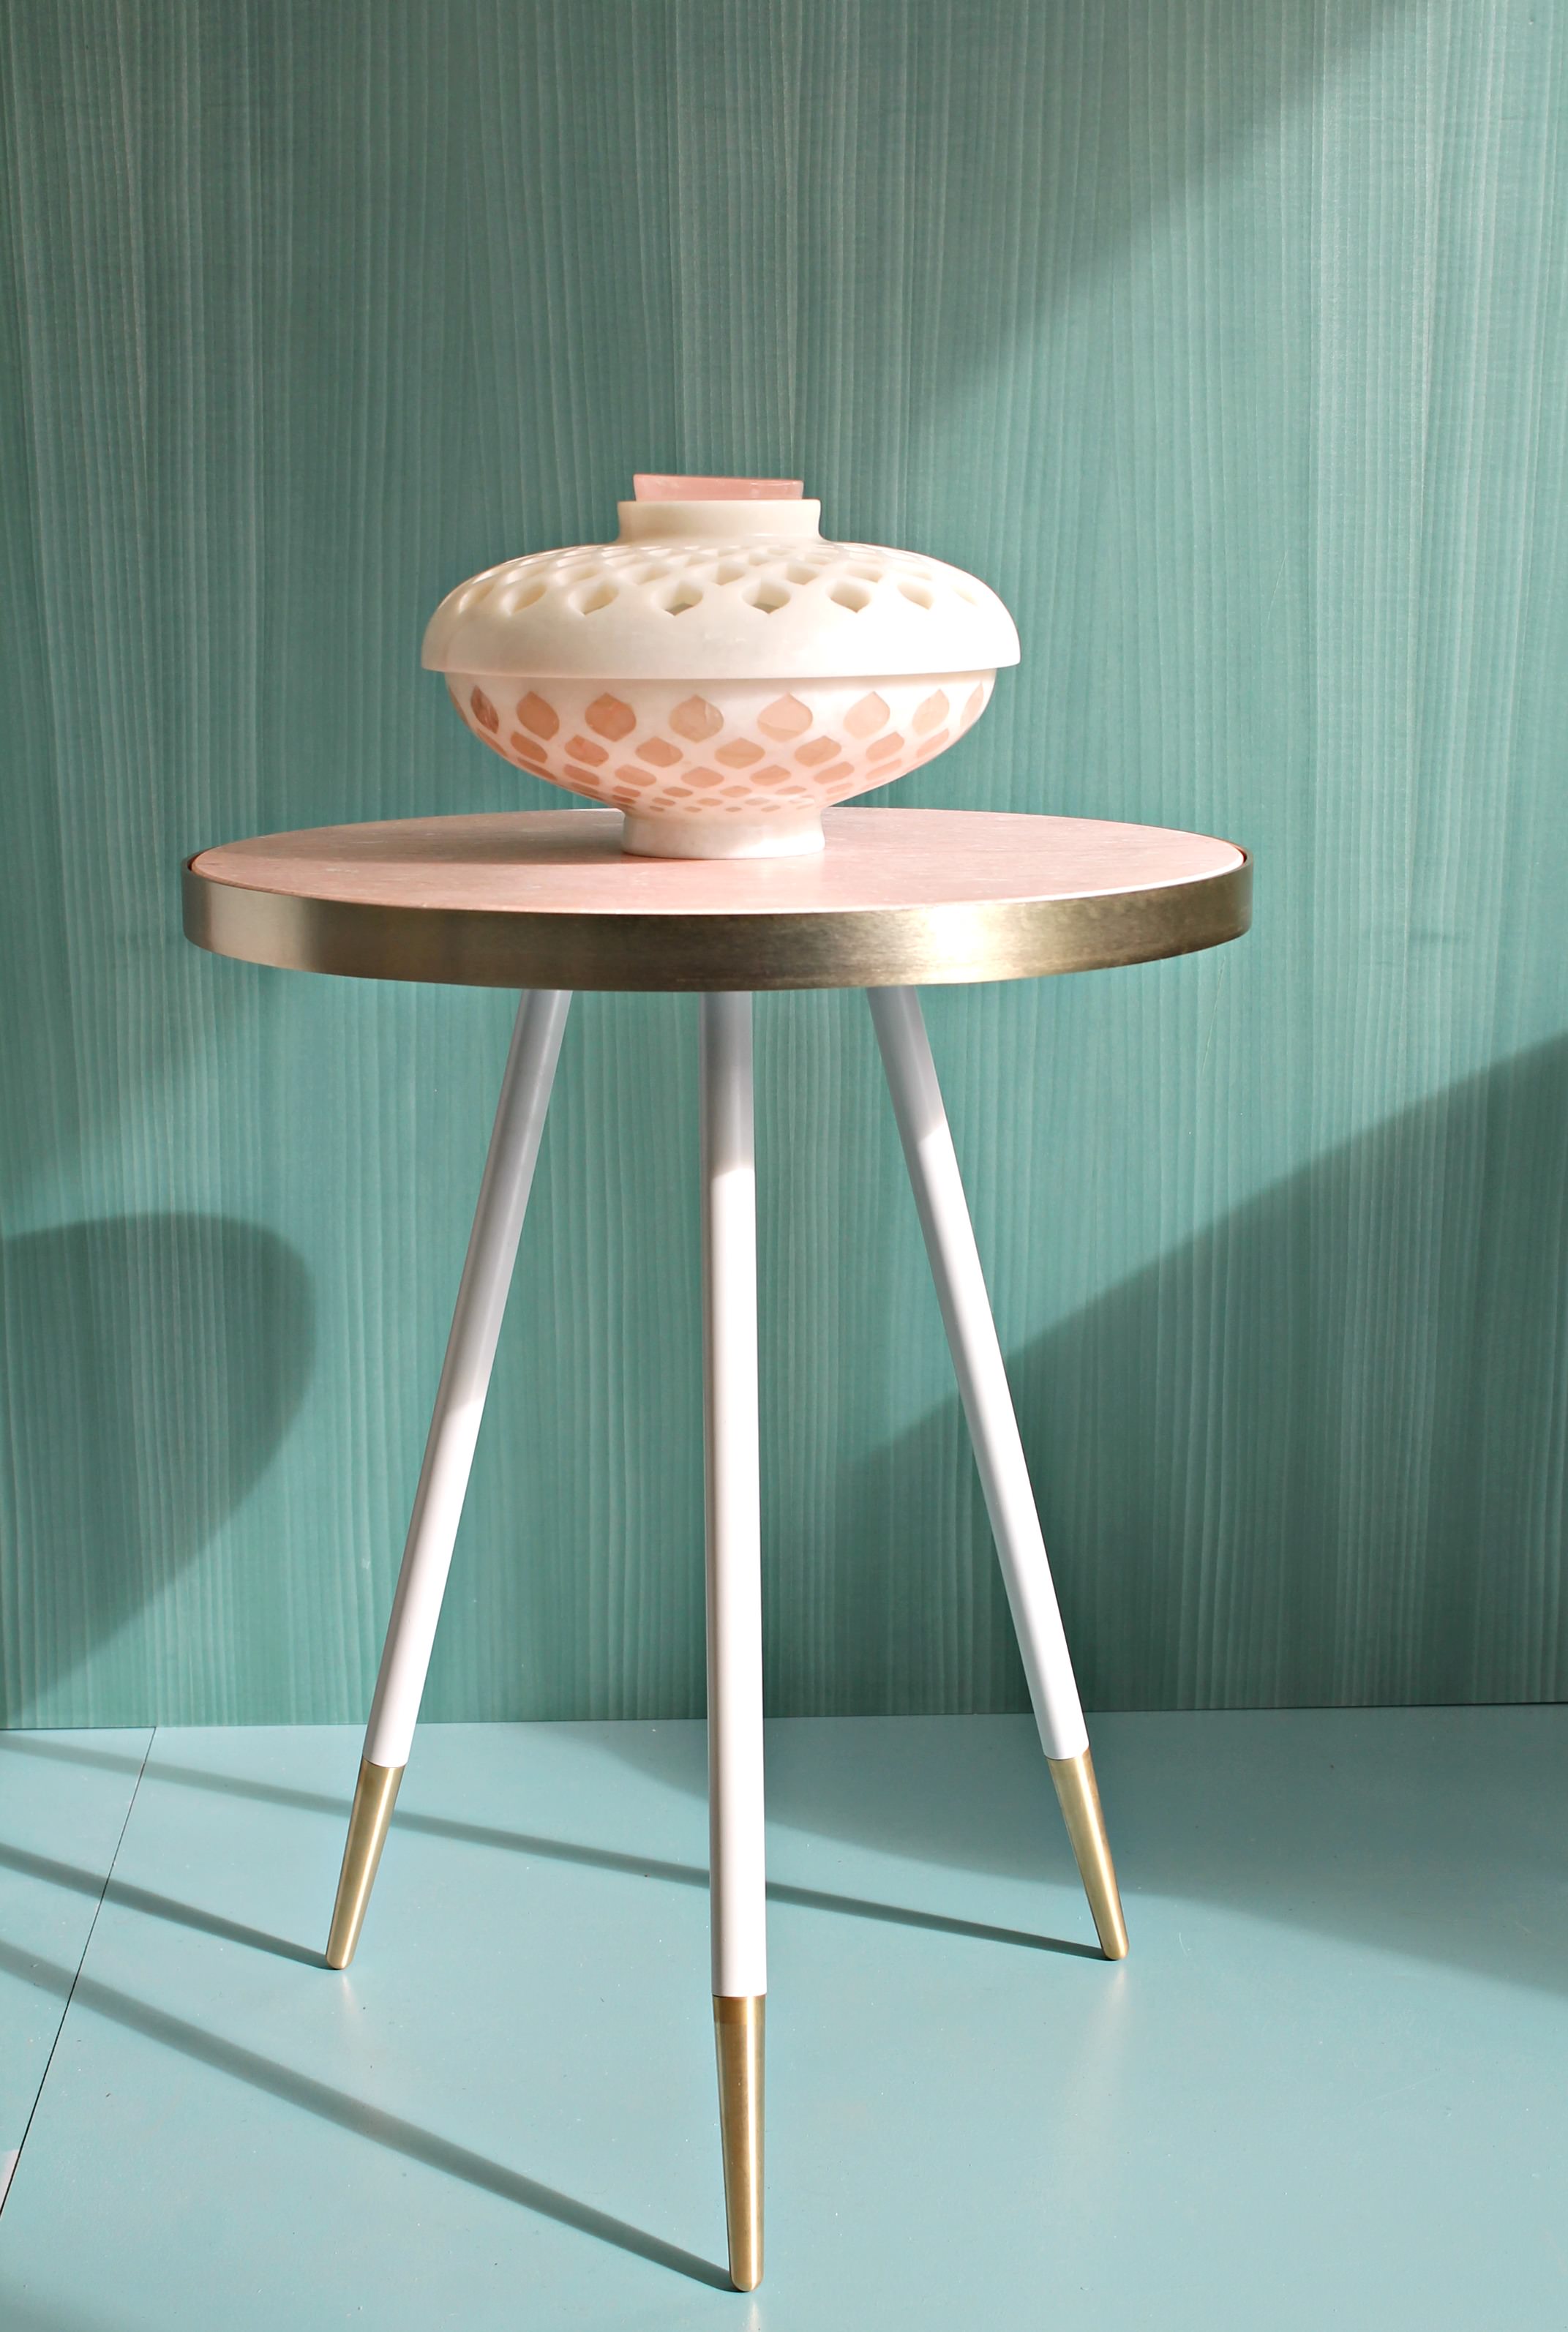 band-table-by-bethan-gray-in-rosa-marble-and-brass-designjunctuion-photo-by-little-big-bell